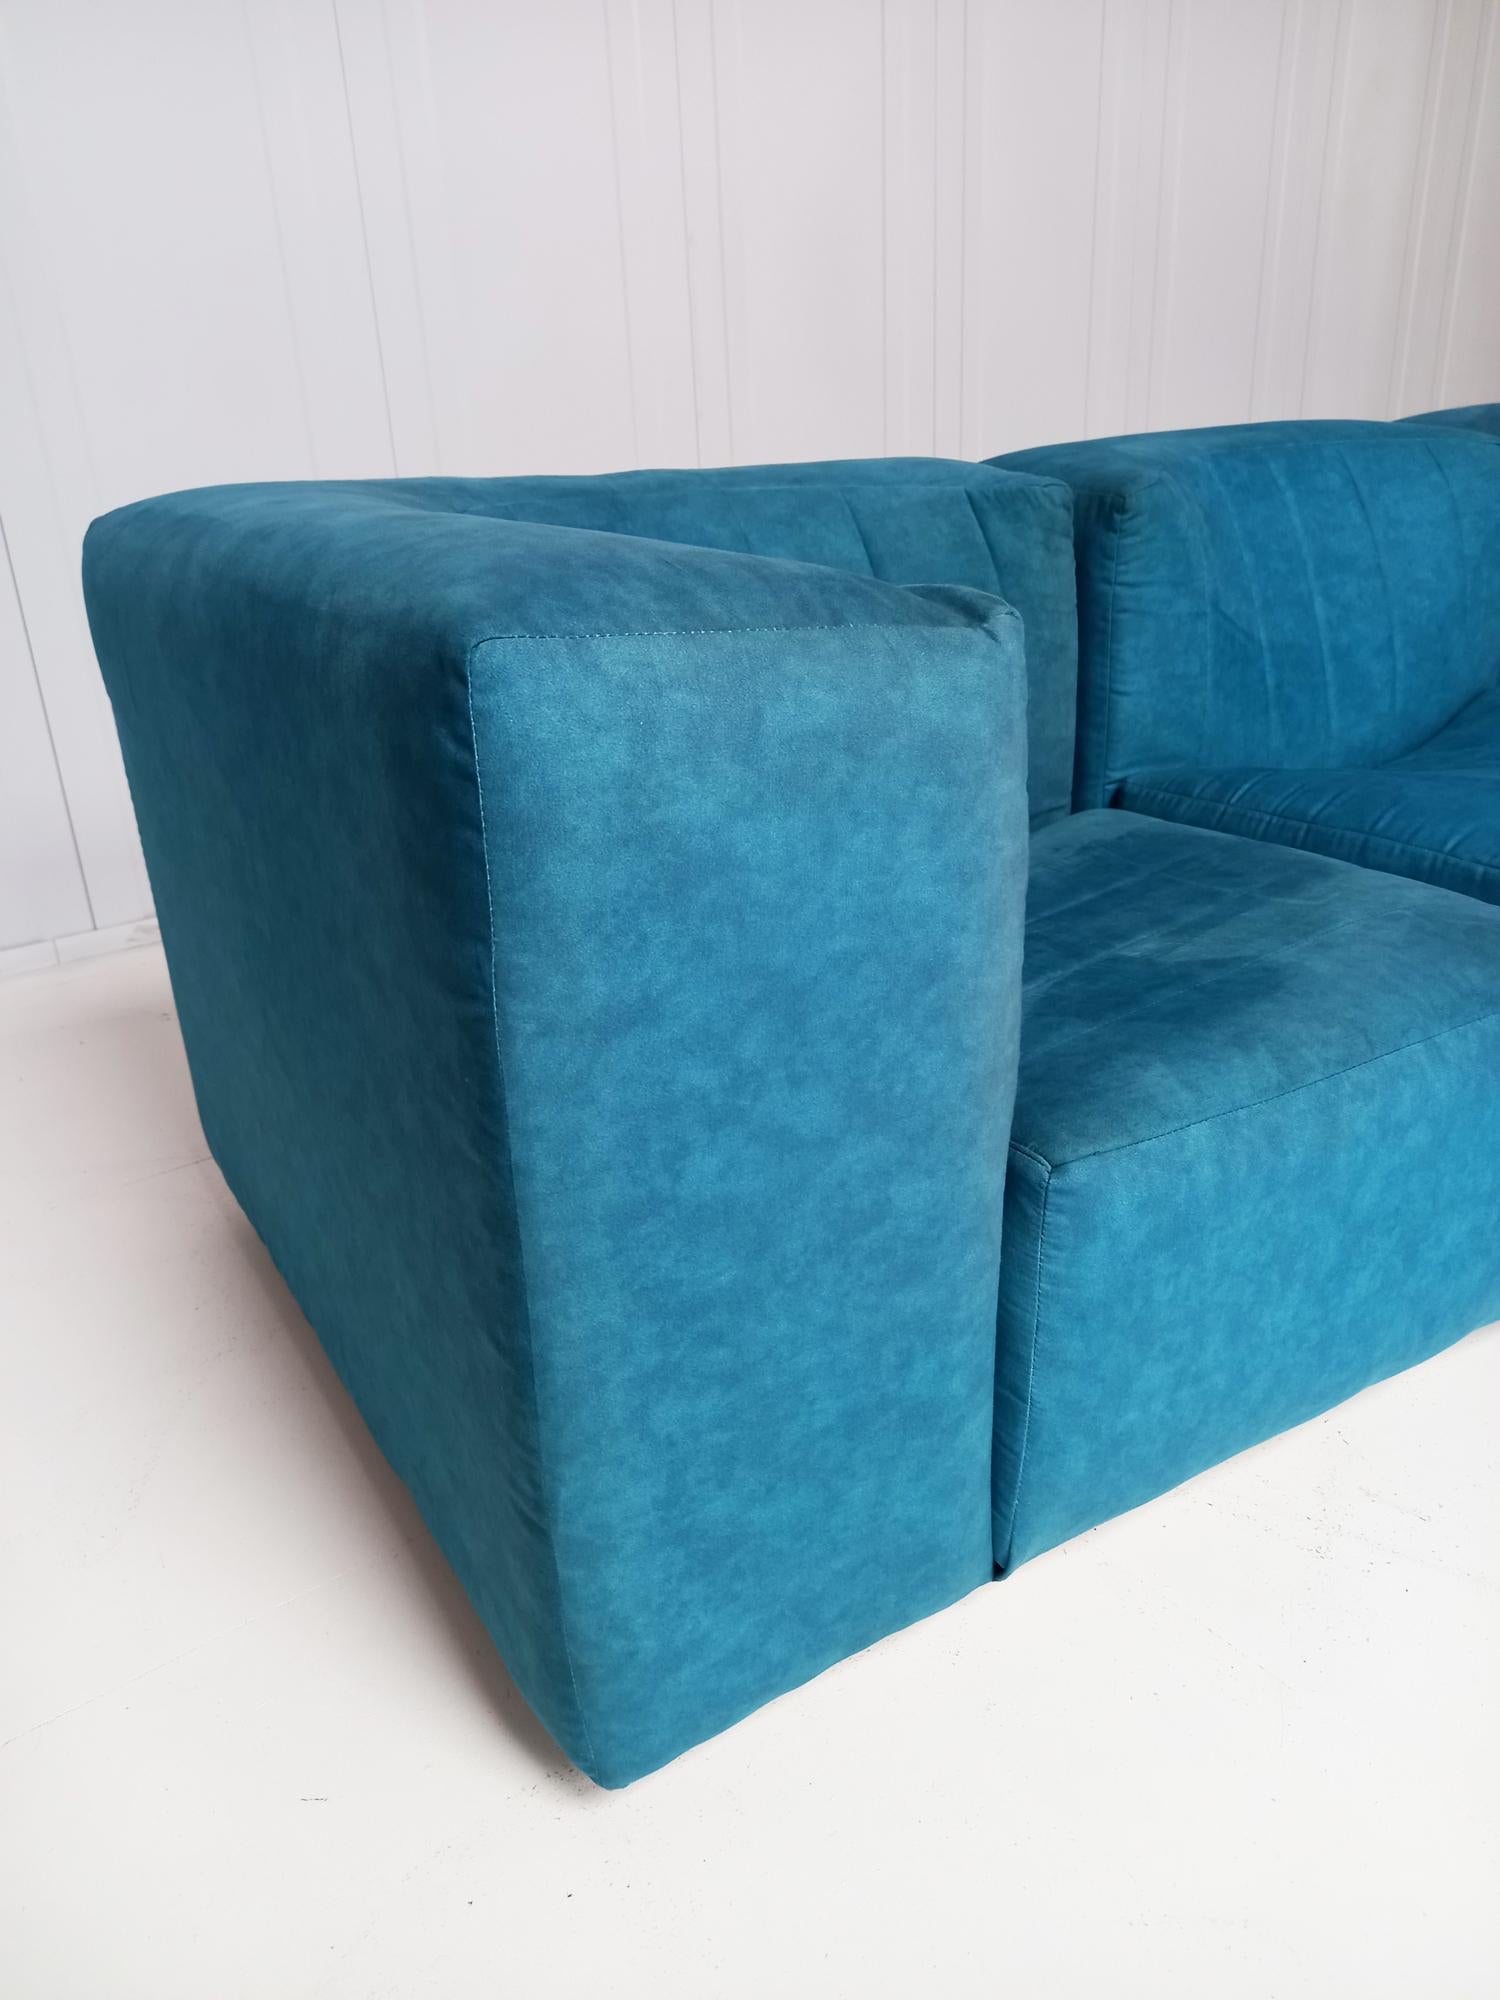 Tito Agnoli for Arflex Sectional Sofa Model '9000' in Blue Upholstery In Good Condition For Sale In Saint Leonards-on-sea, England